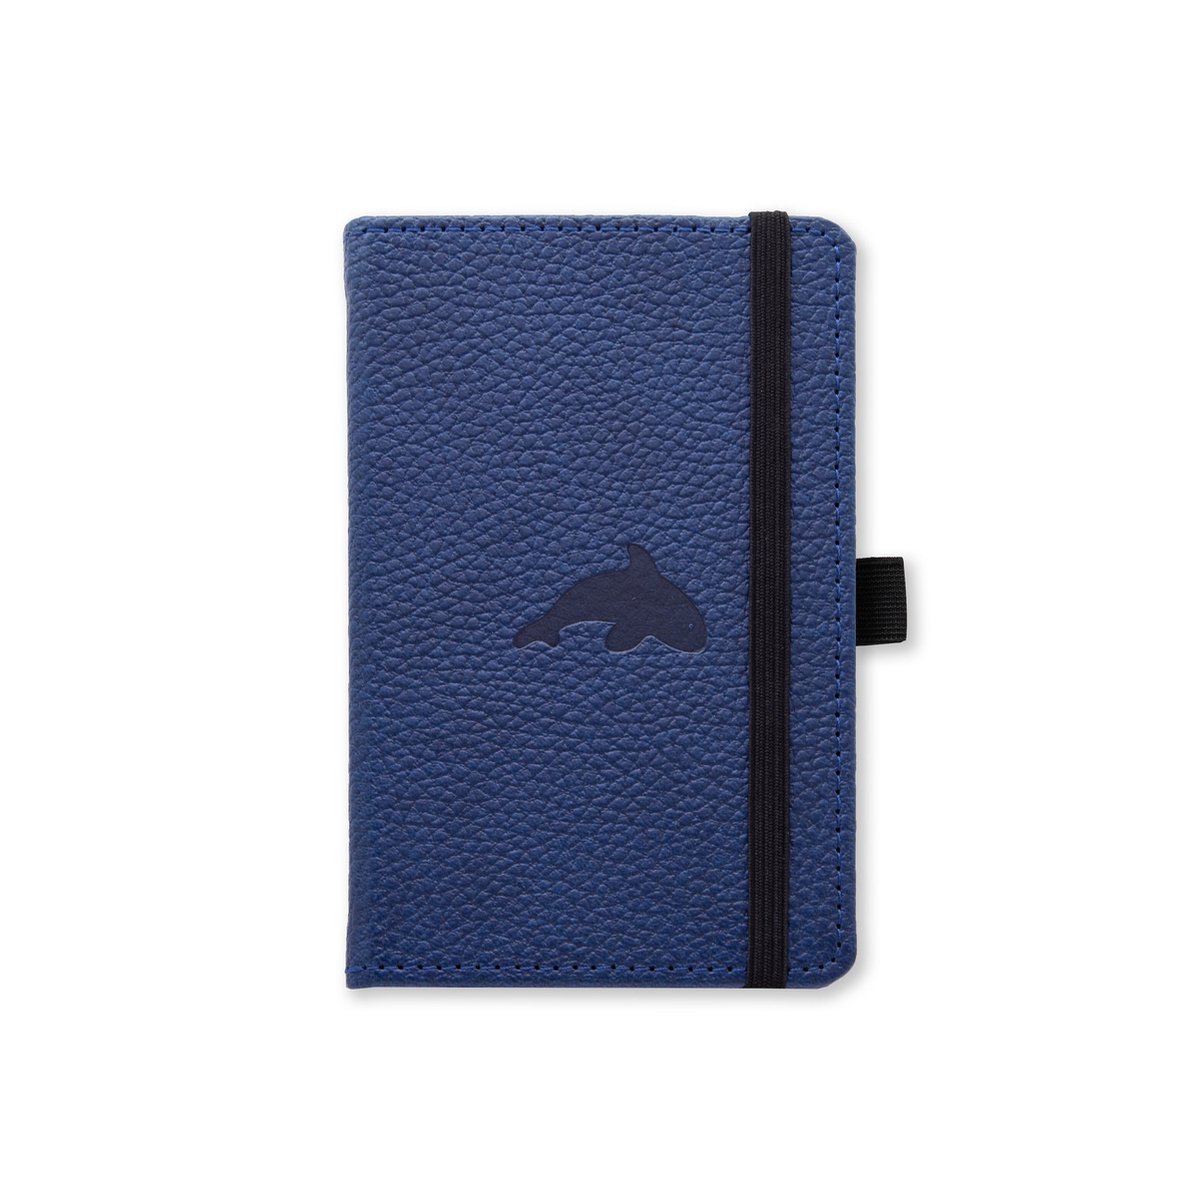 Dingbats A6 Pocket Wildlife Blue Whale Notebook – Dotted